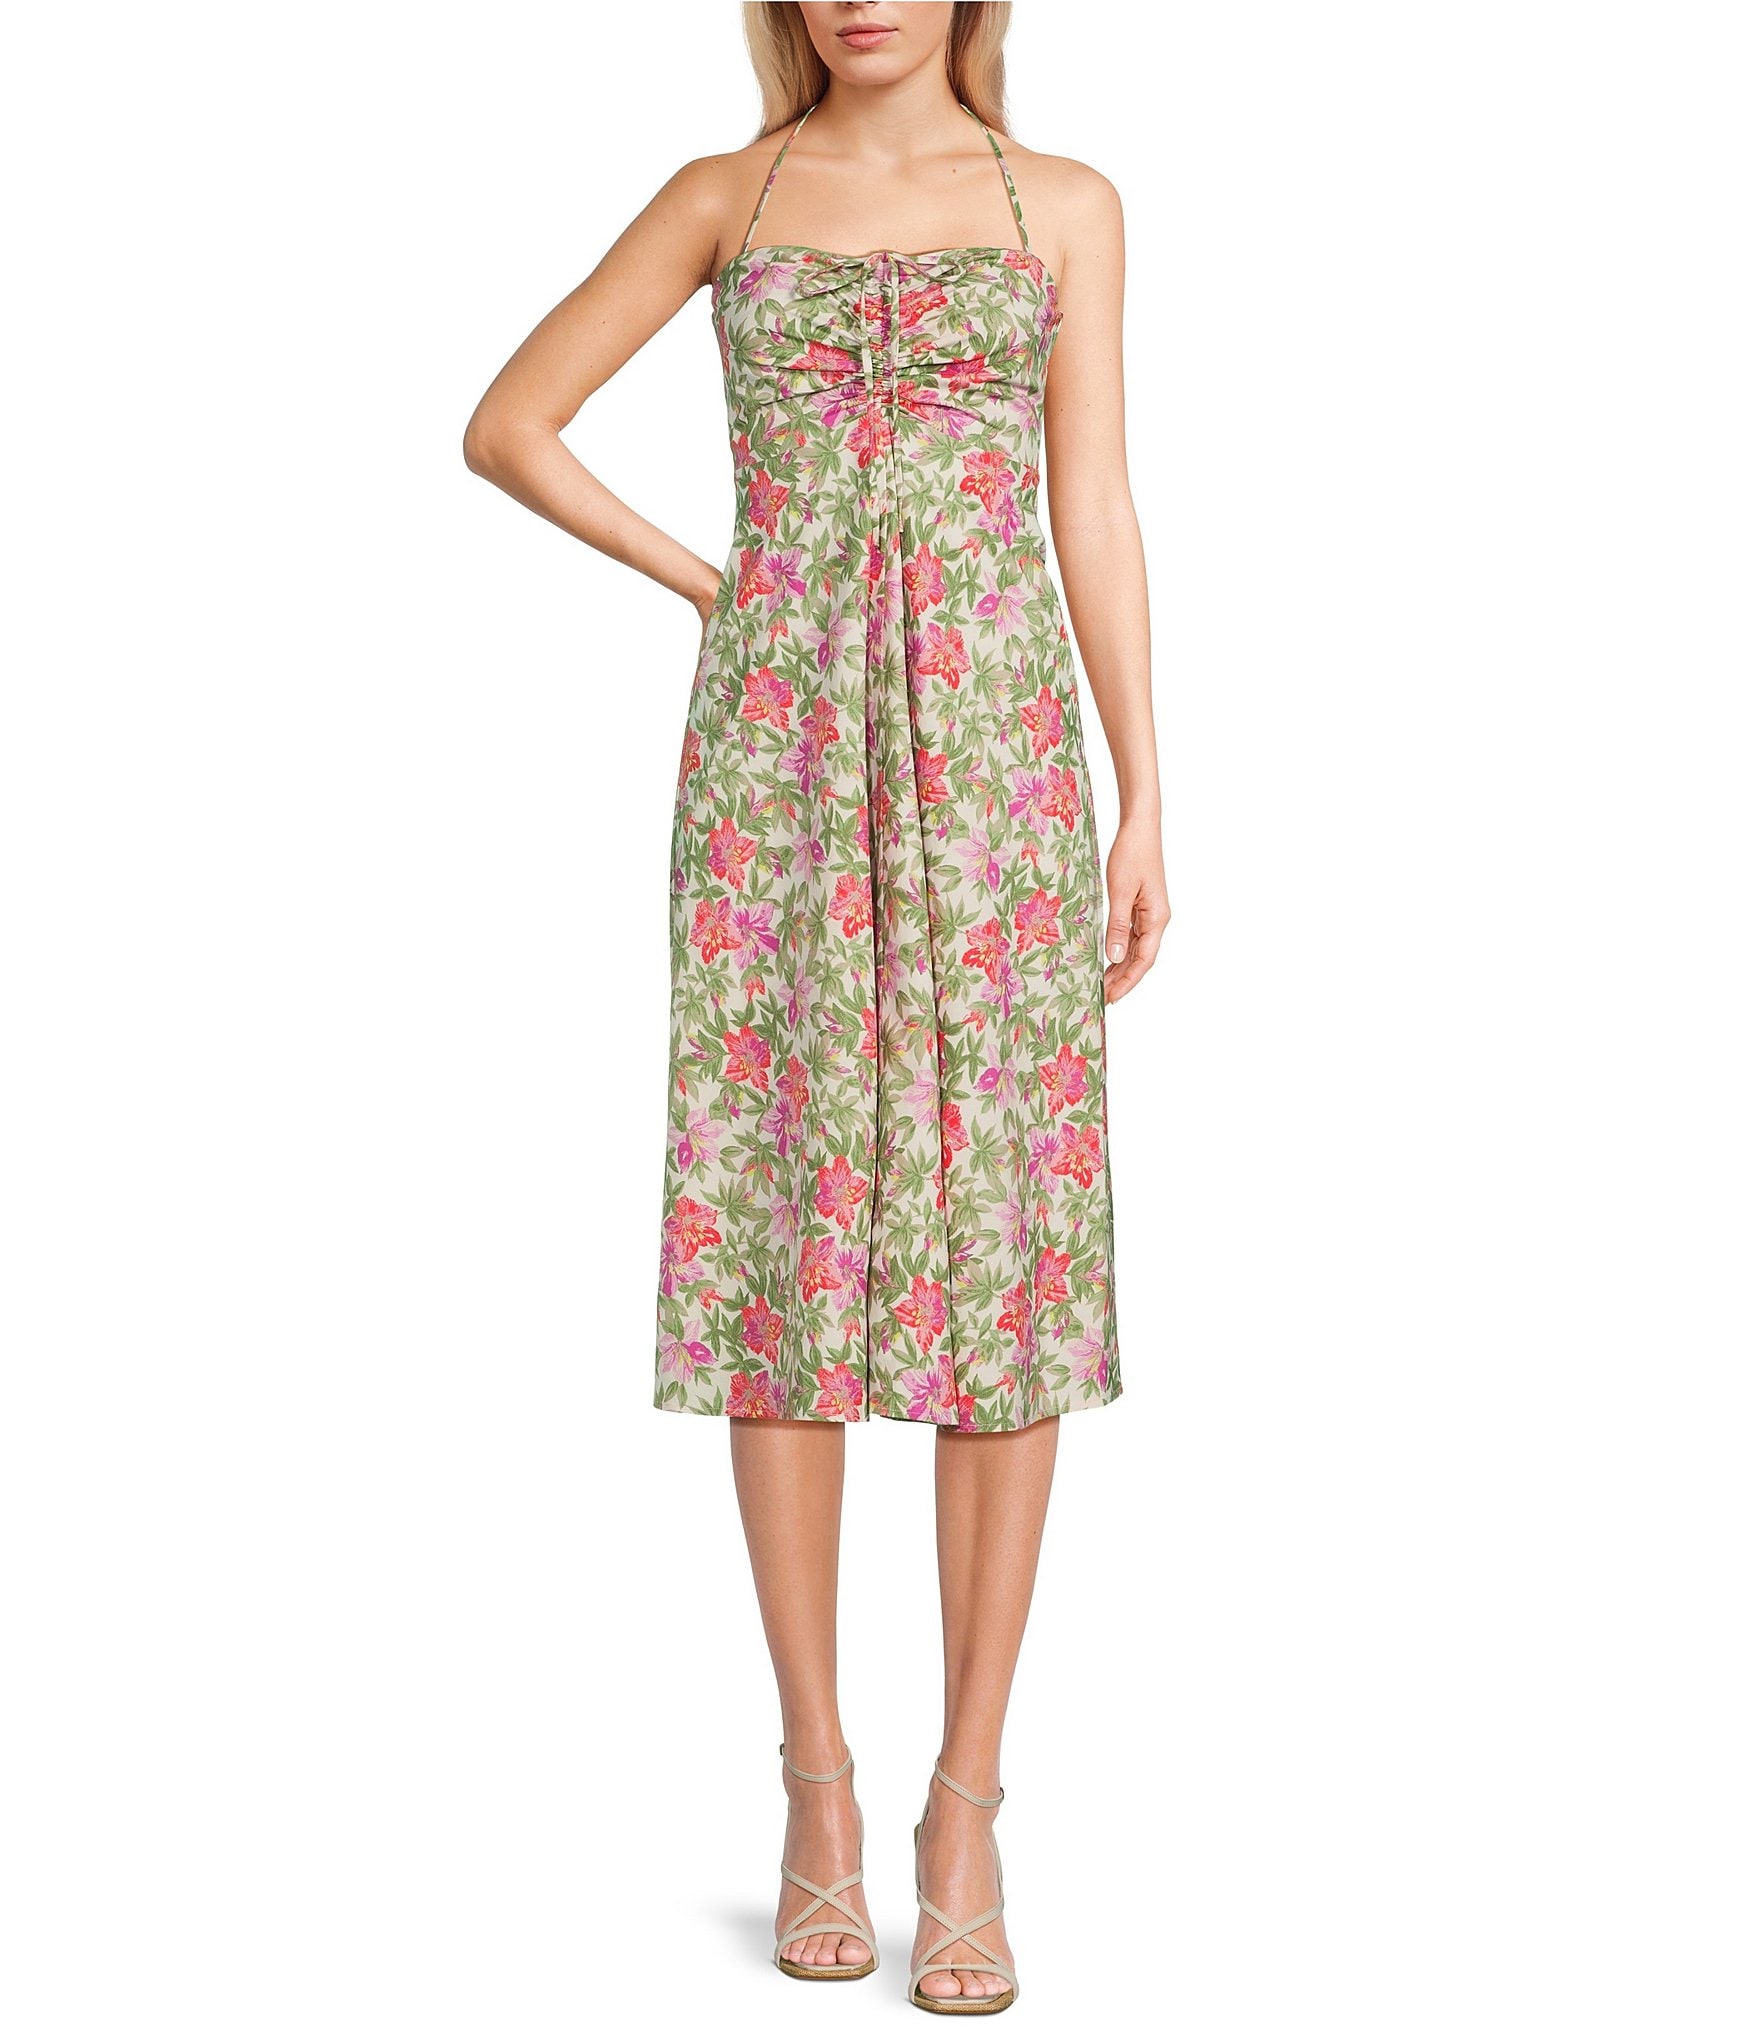 Floral Cut Out Dress from Wayf - Central Florida Chic